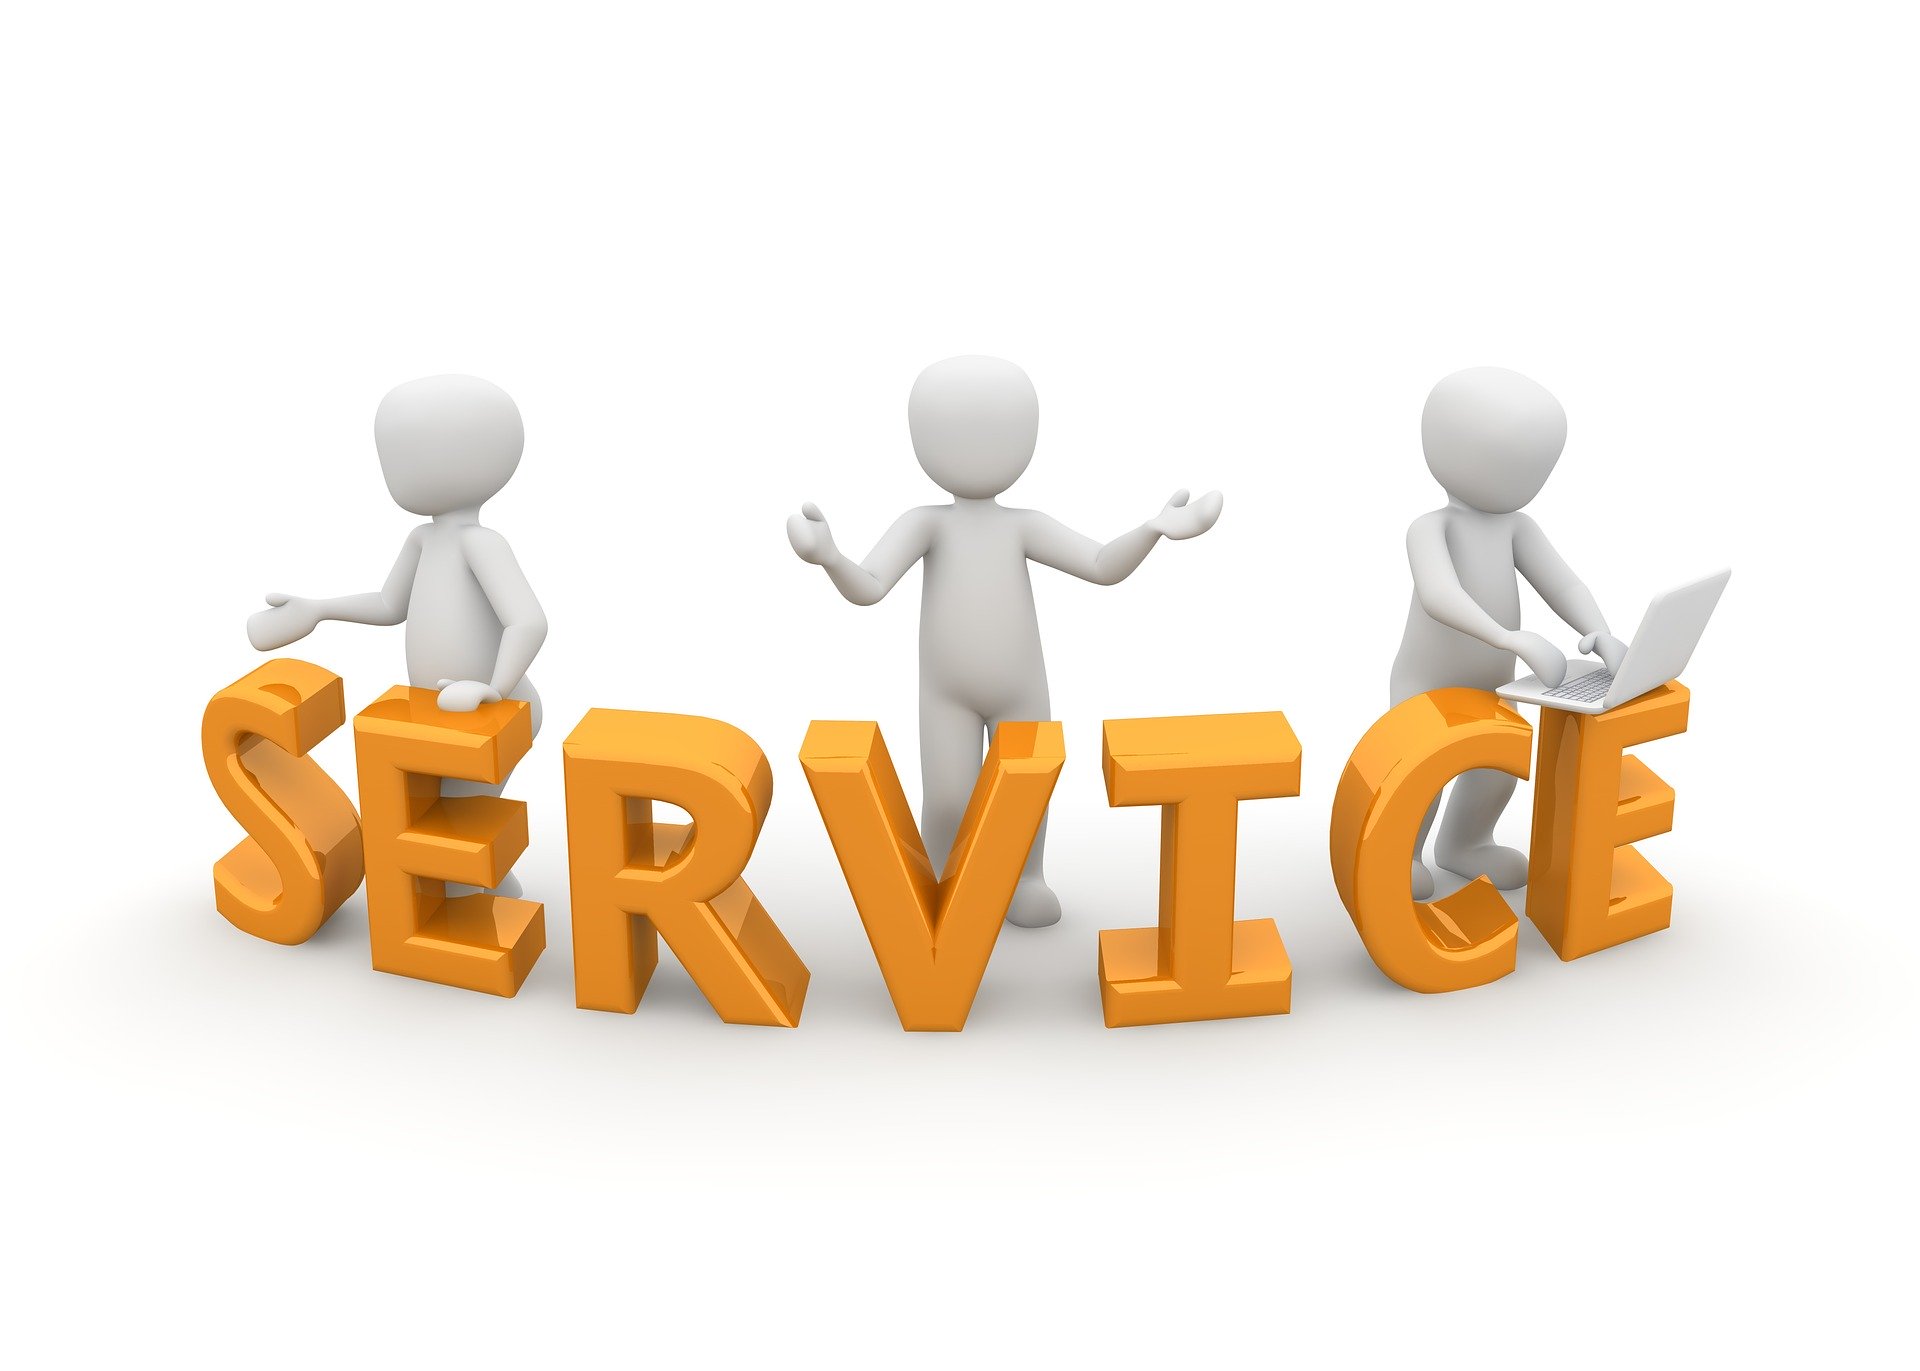 SERVICE-IMAGE BY PEGGY UND MARCO LACHMANN-ANKE FROM PIXABAY